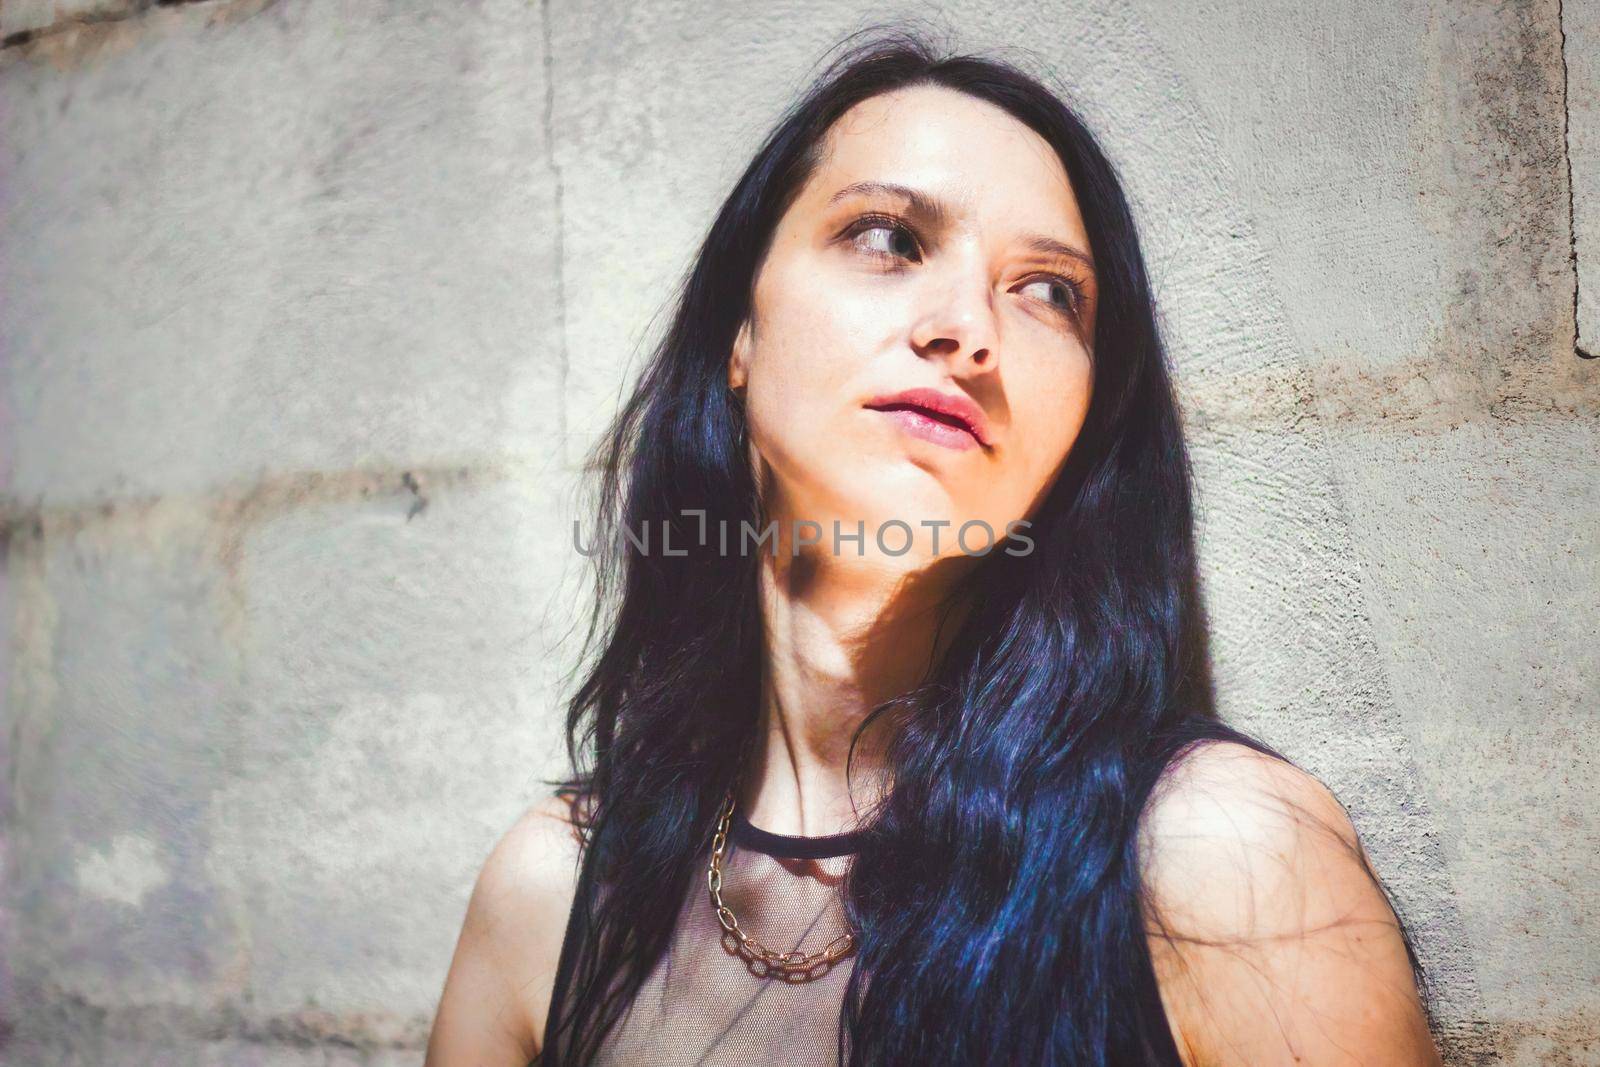 A goth girl leaning against a wall looking away from the camera